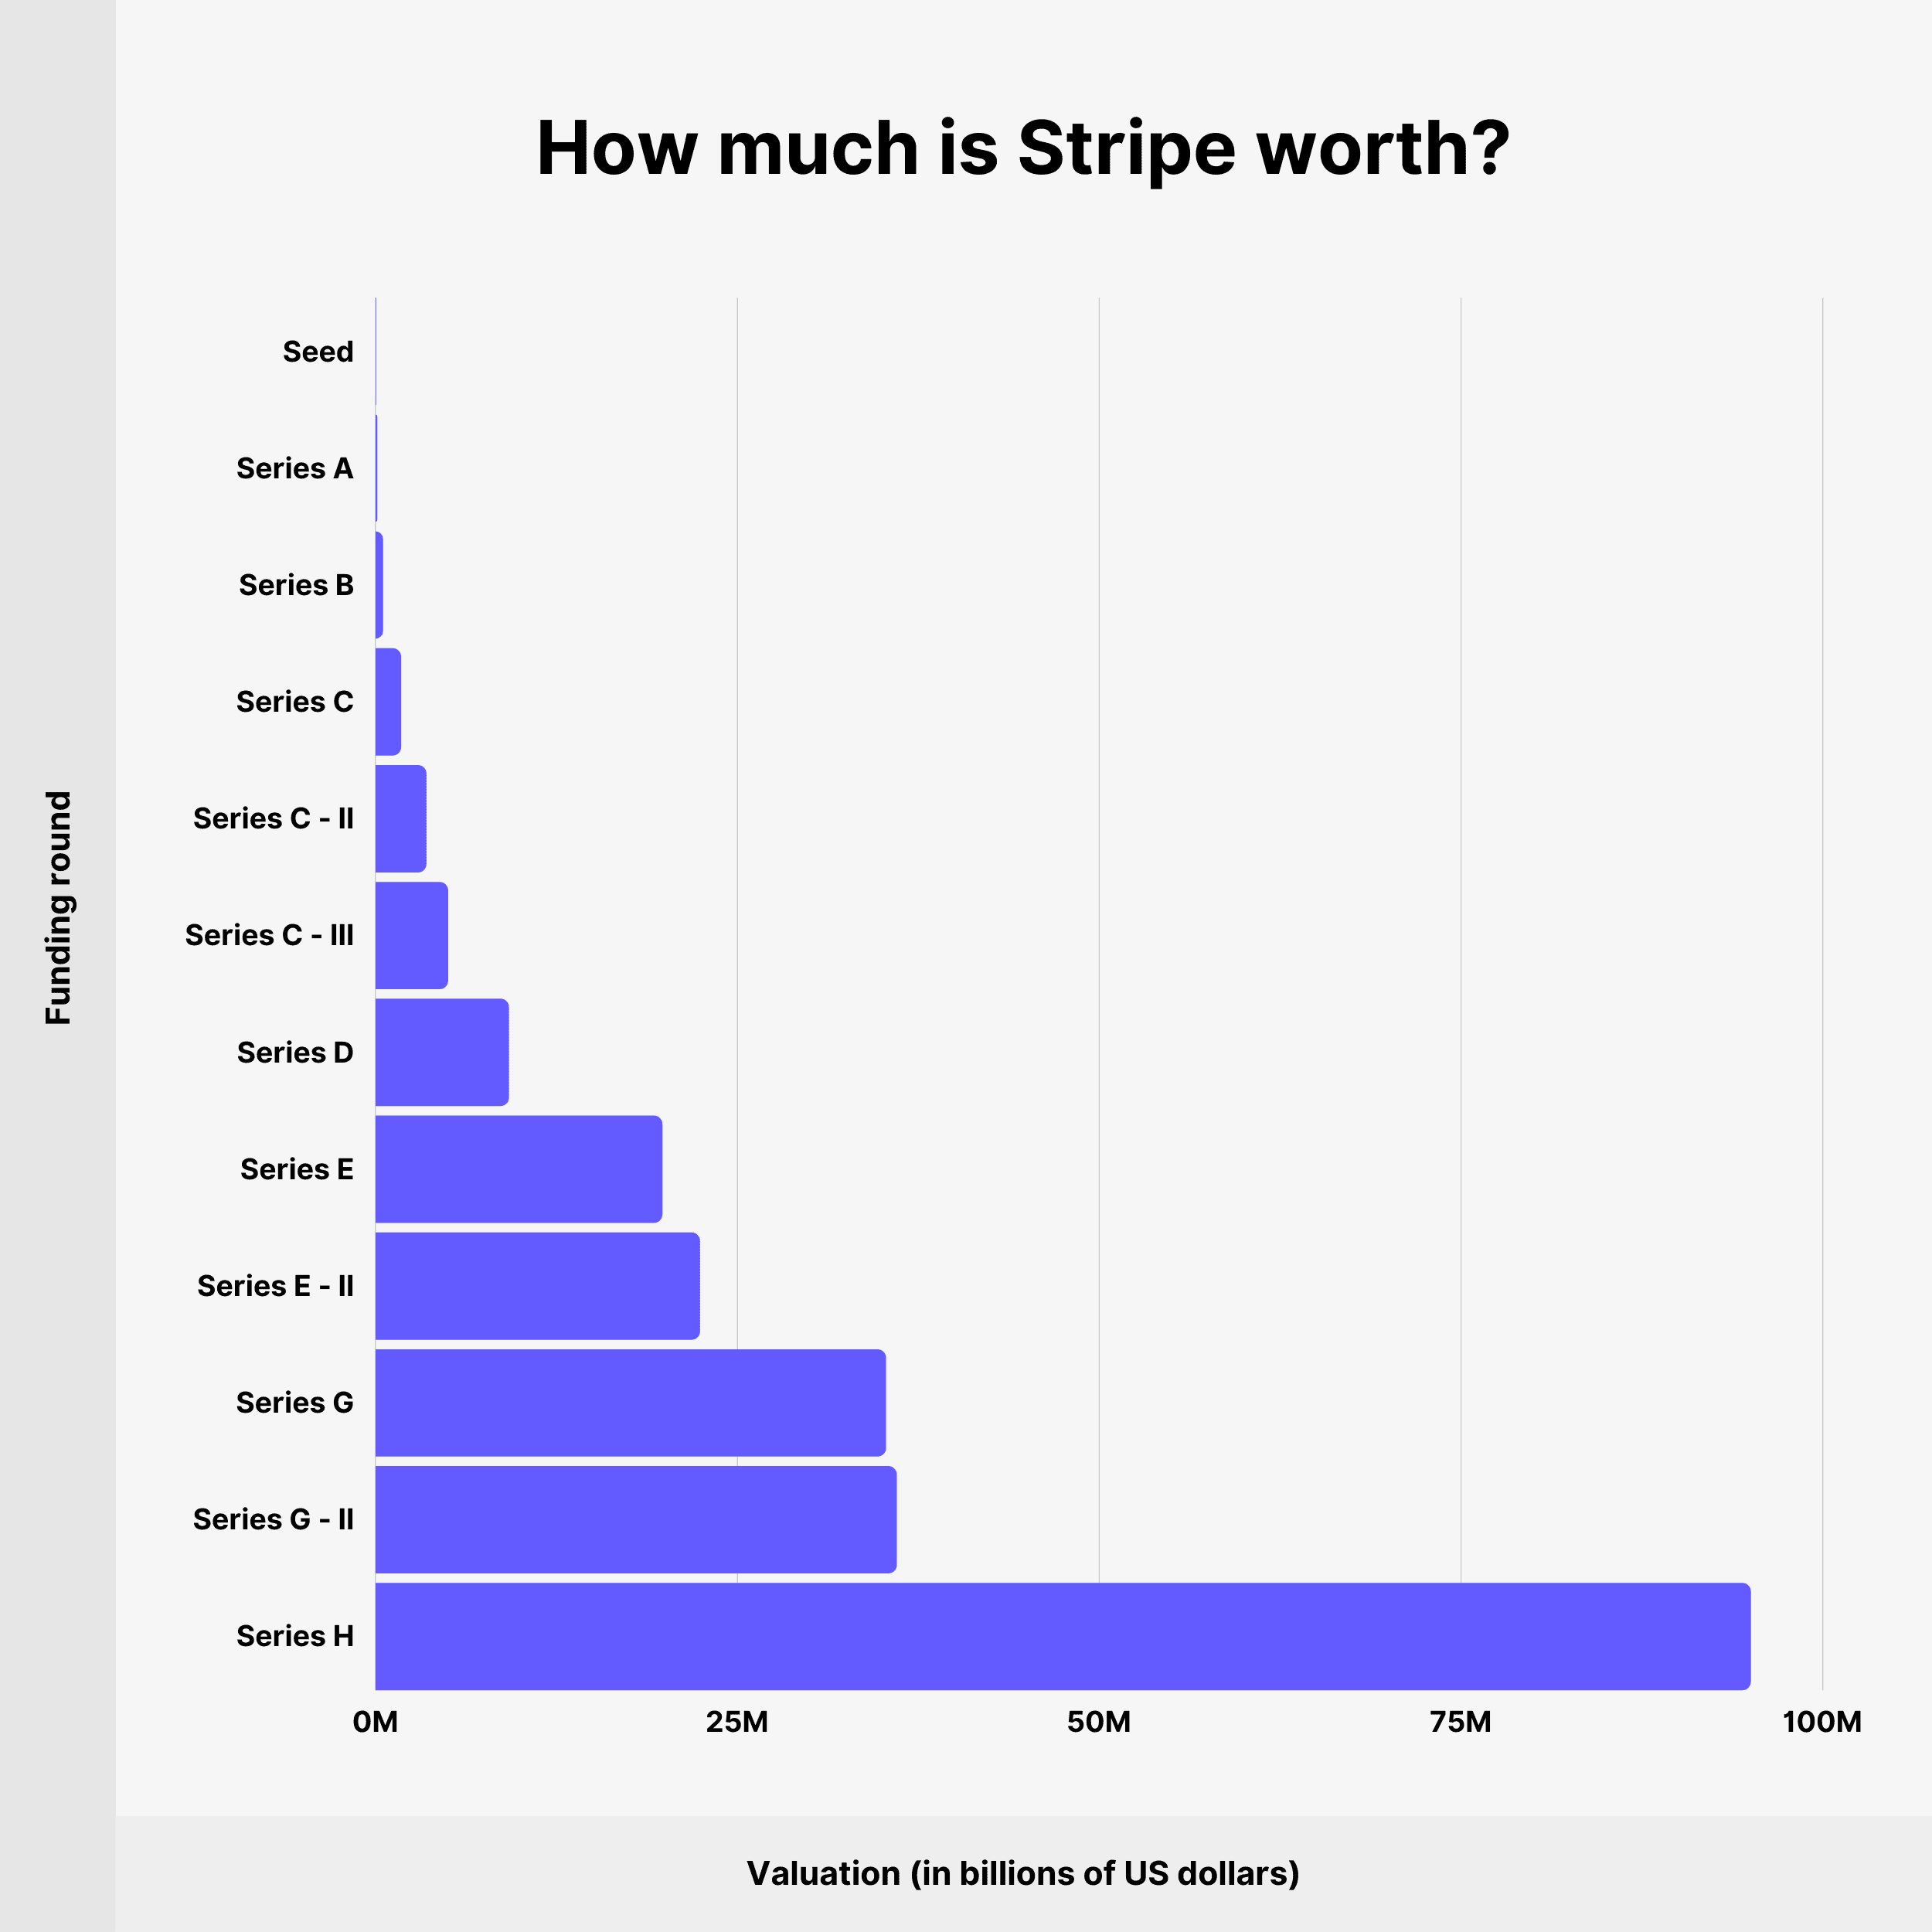 How much is Stripe worth?